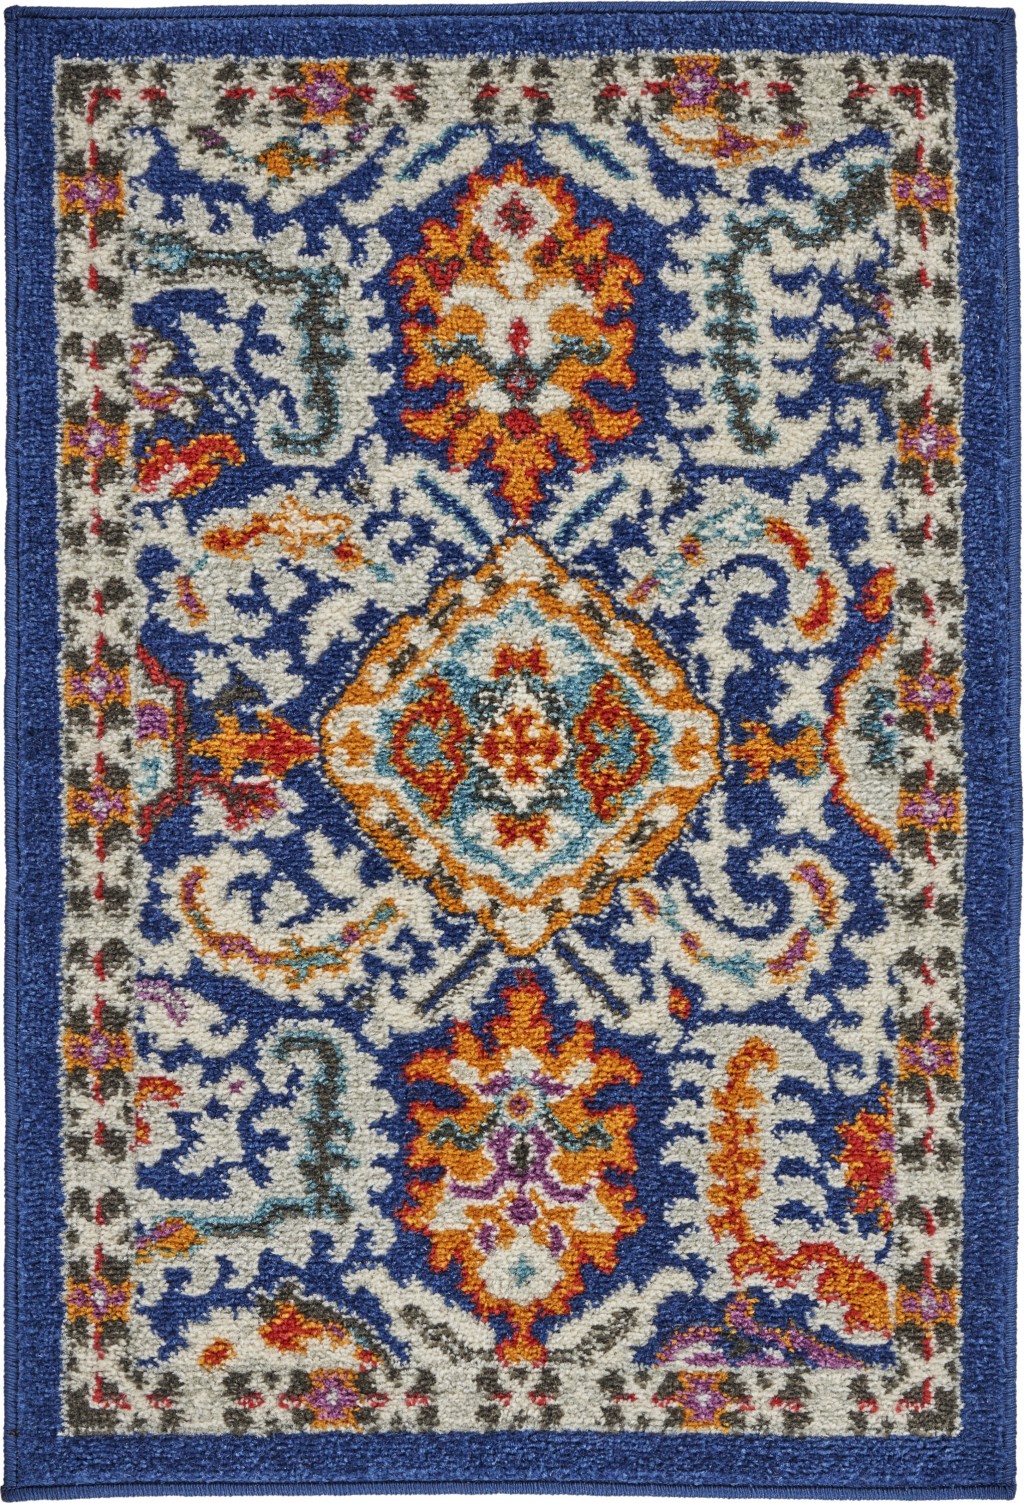 2' X 3' Blue And Ivory Power Loom Area Rug-385638-1